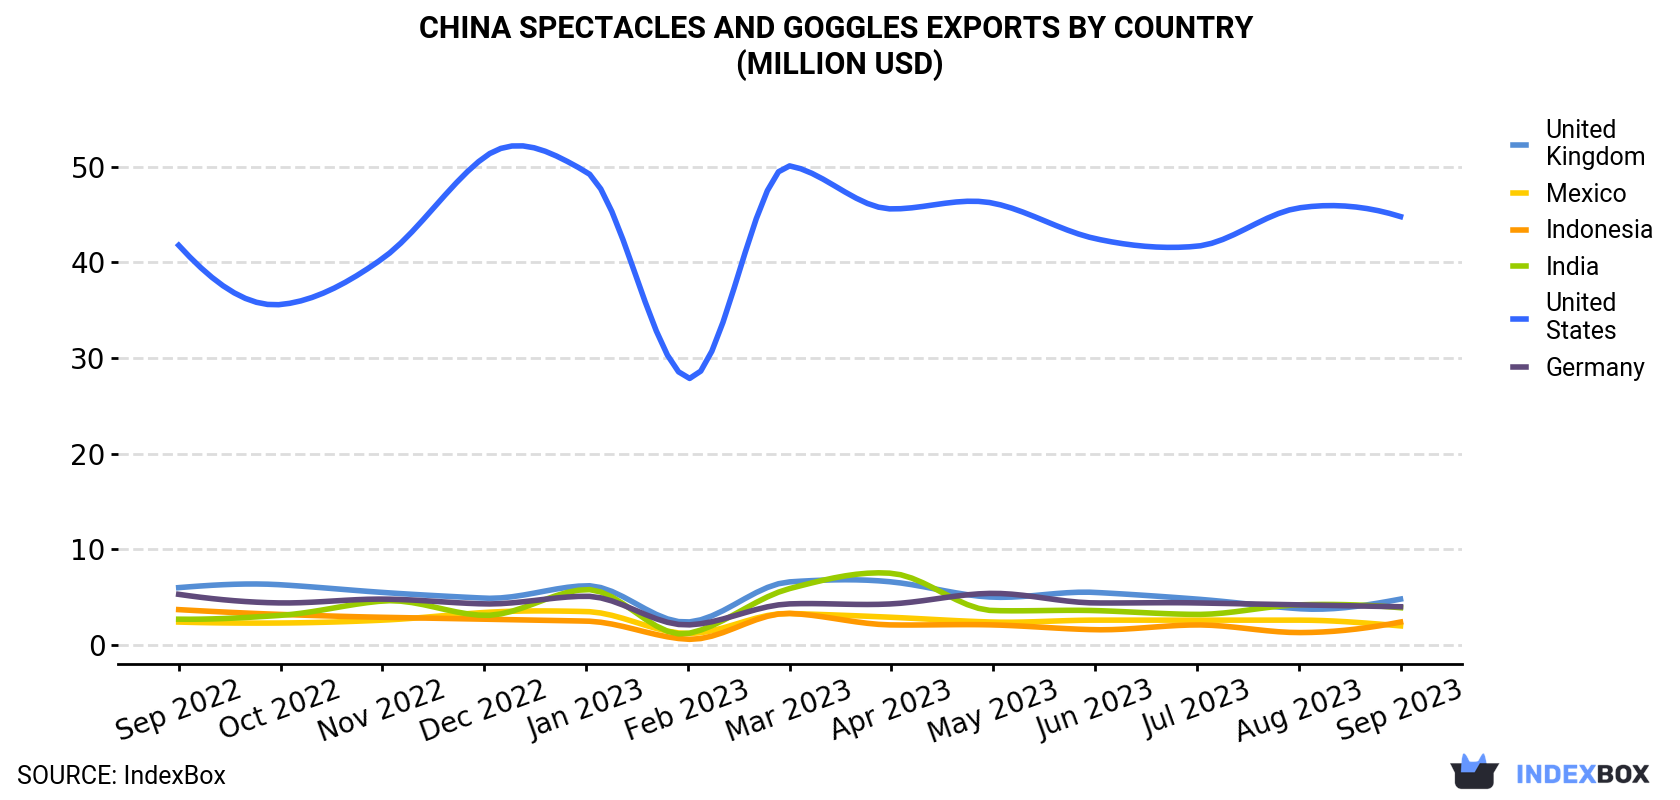 China Spectacles And Goggles Exports By Country (Million USD)